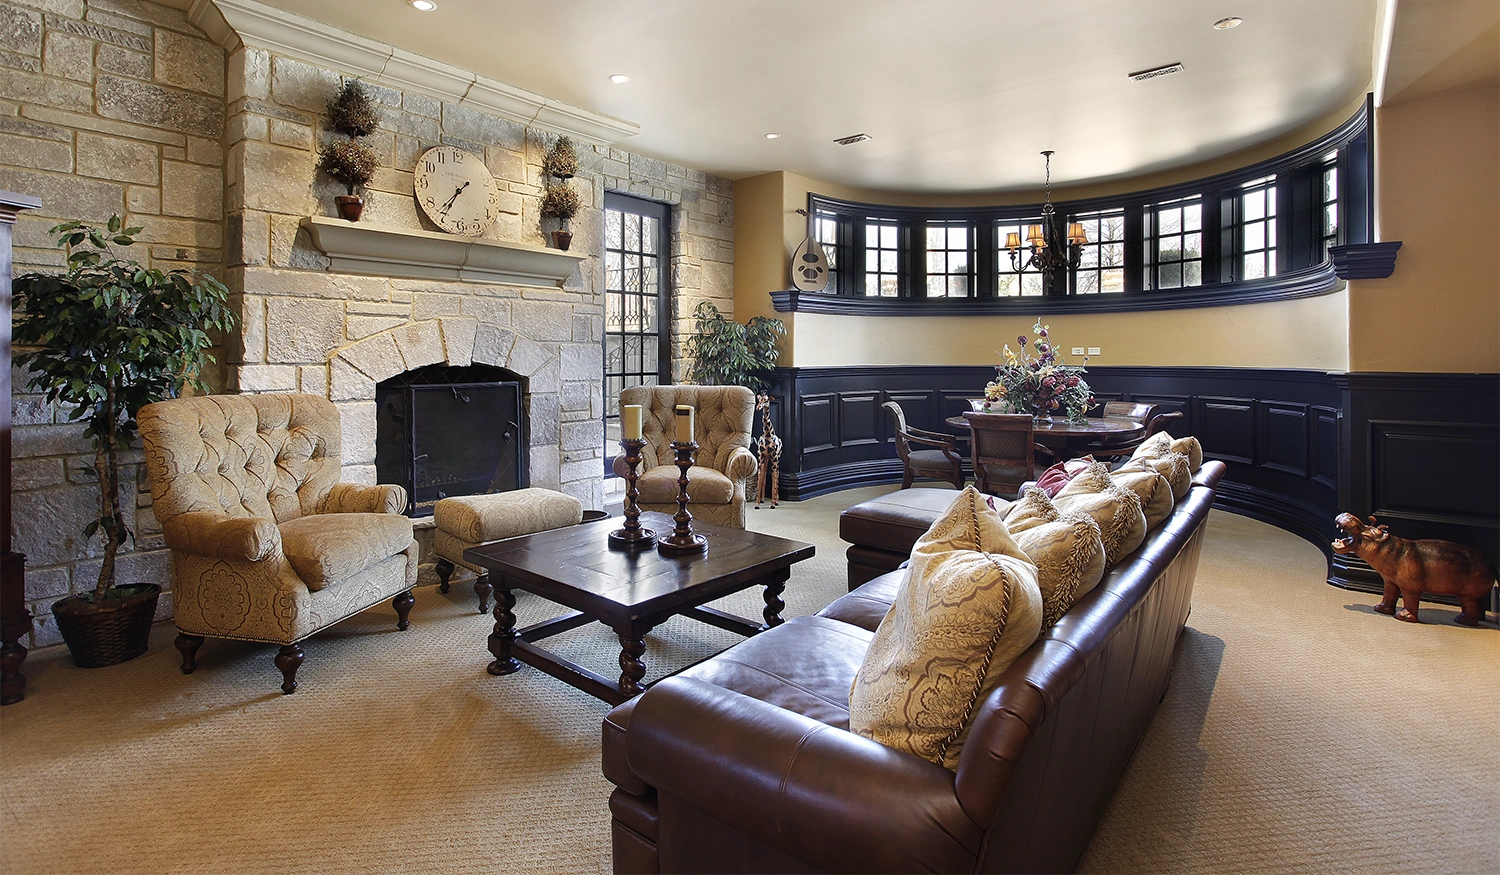 A remodeled basement featuring a dark leather couch, stone fireplace, and several armchairs.